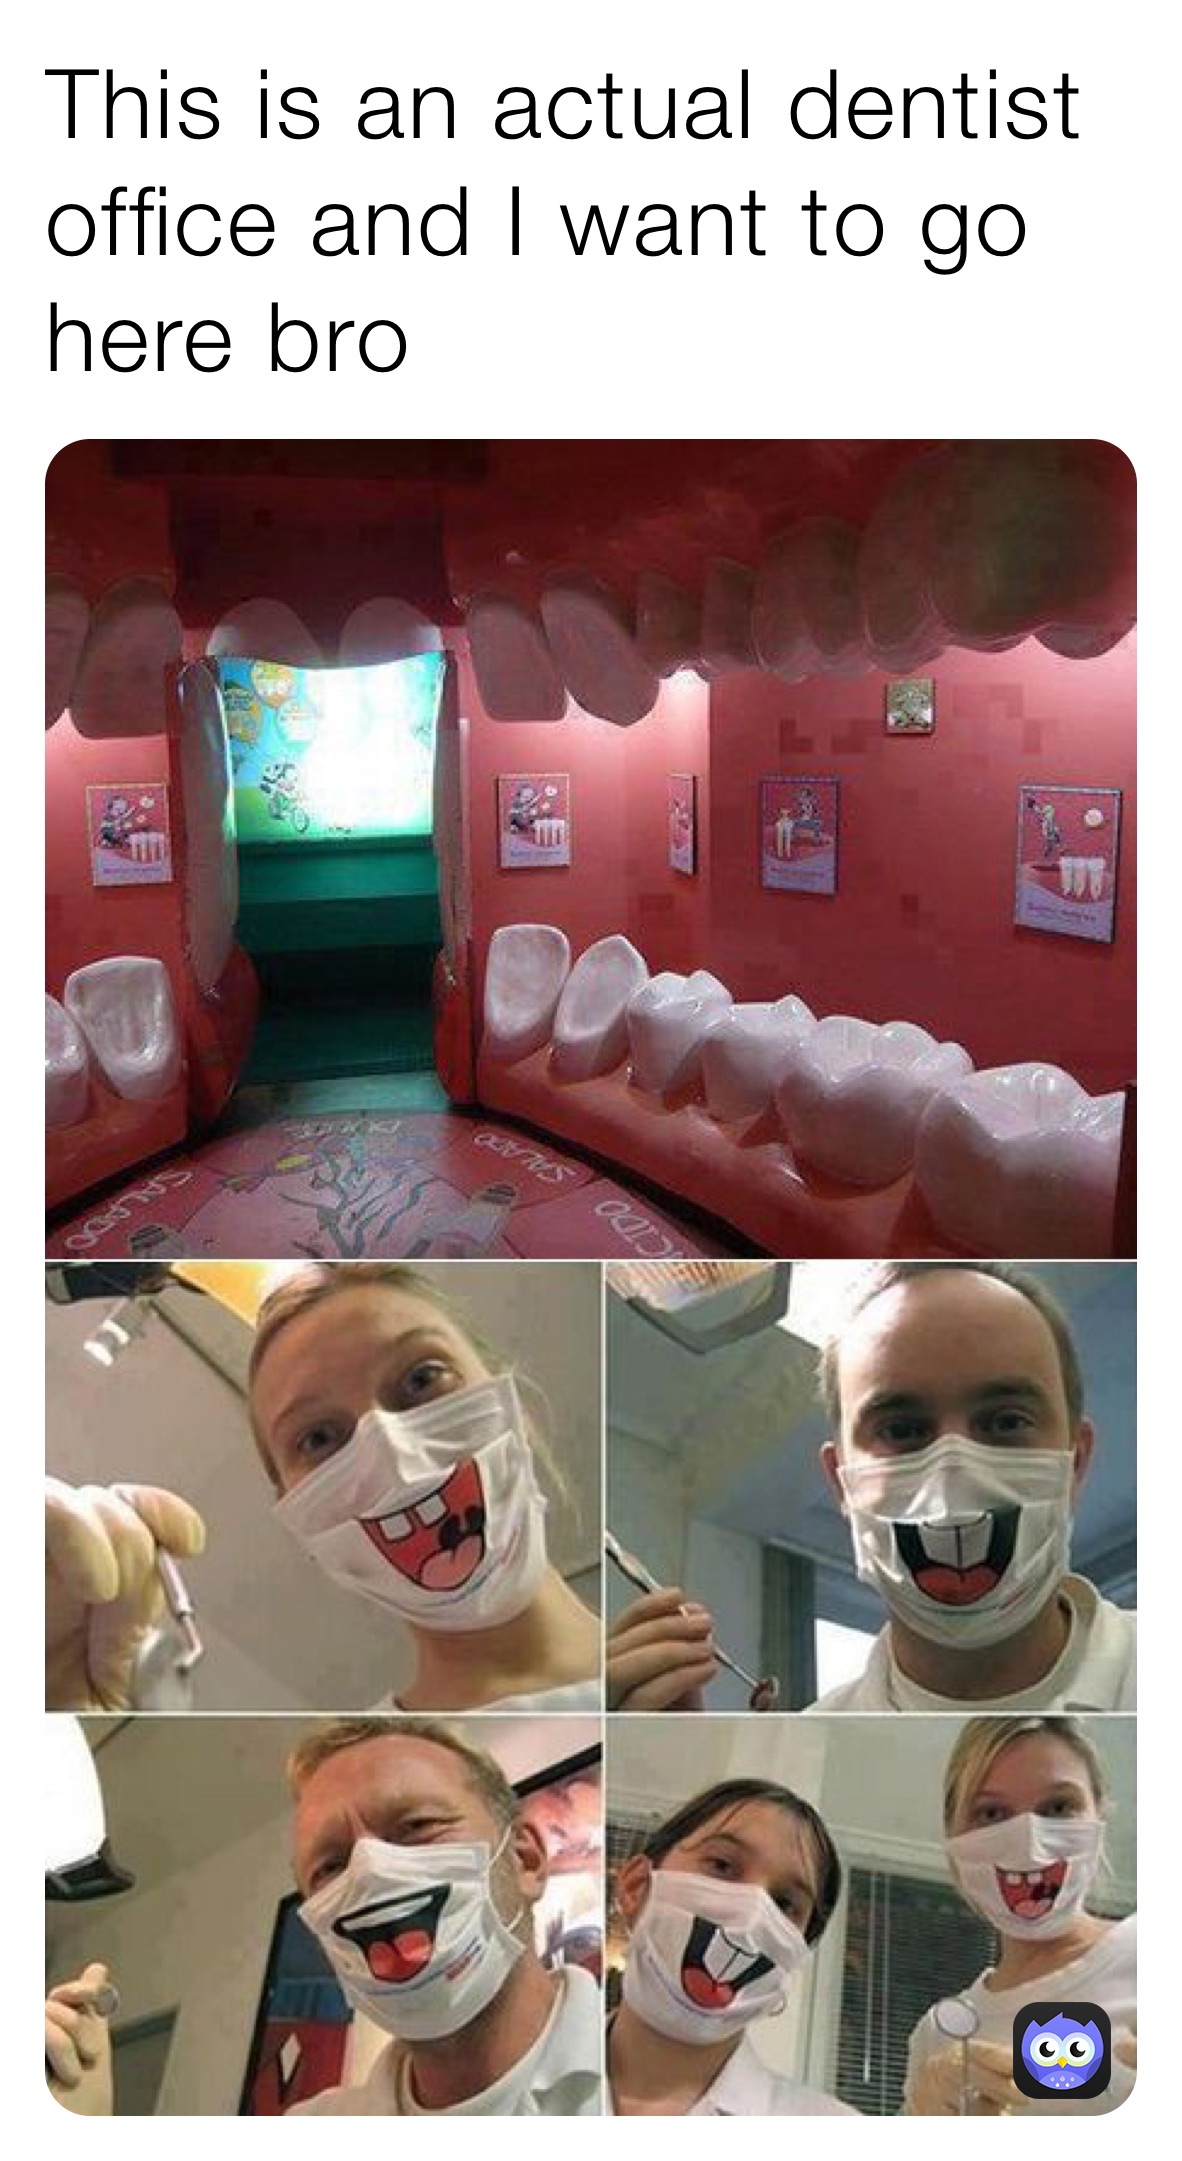 This is an actual dentist office and I want to go here bro